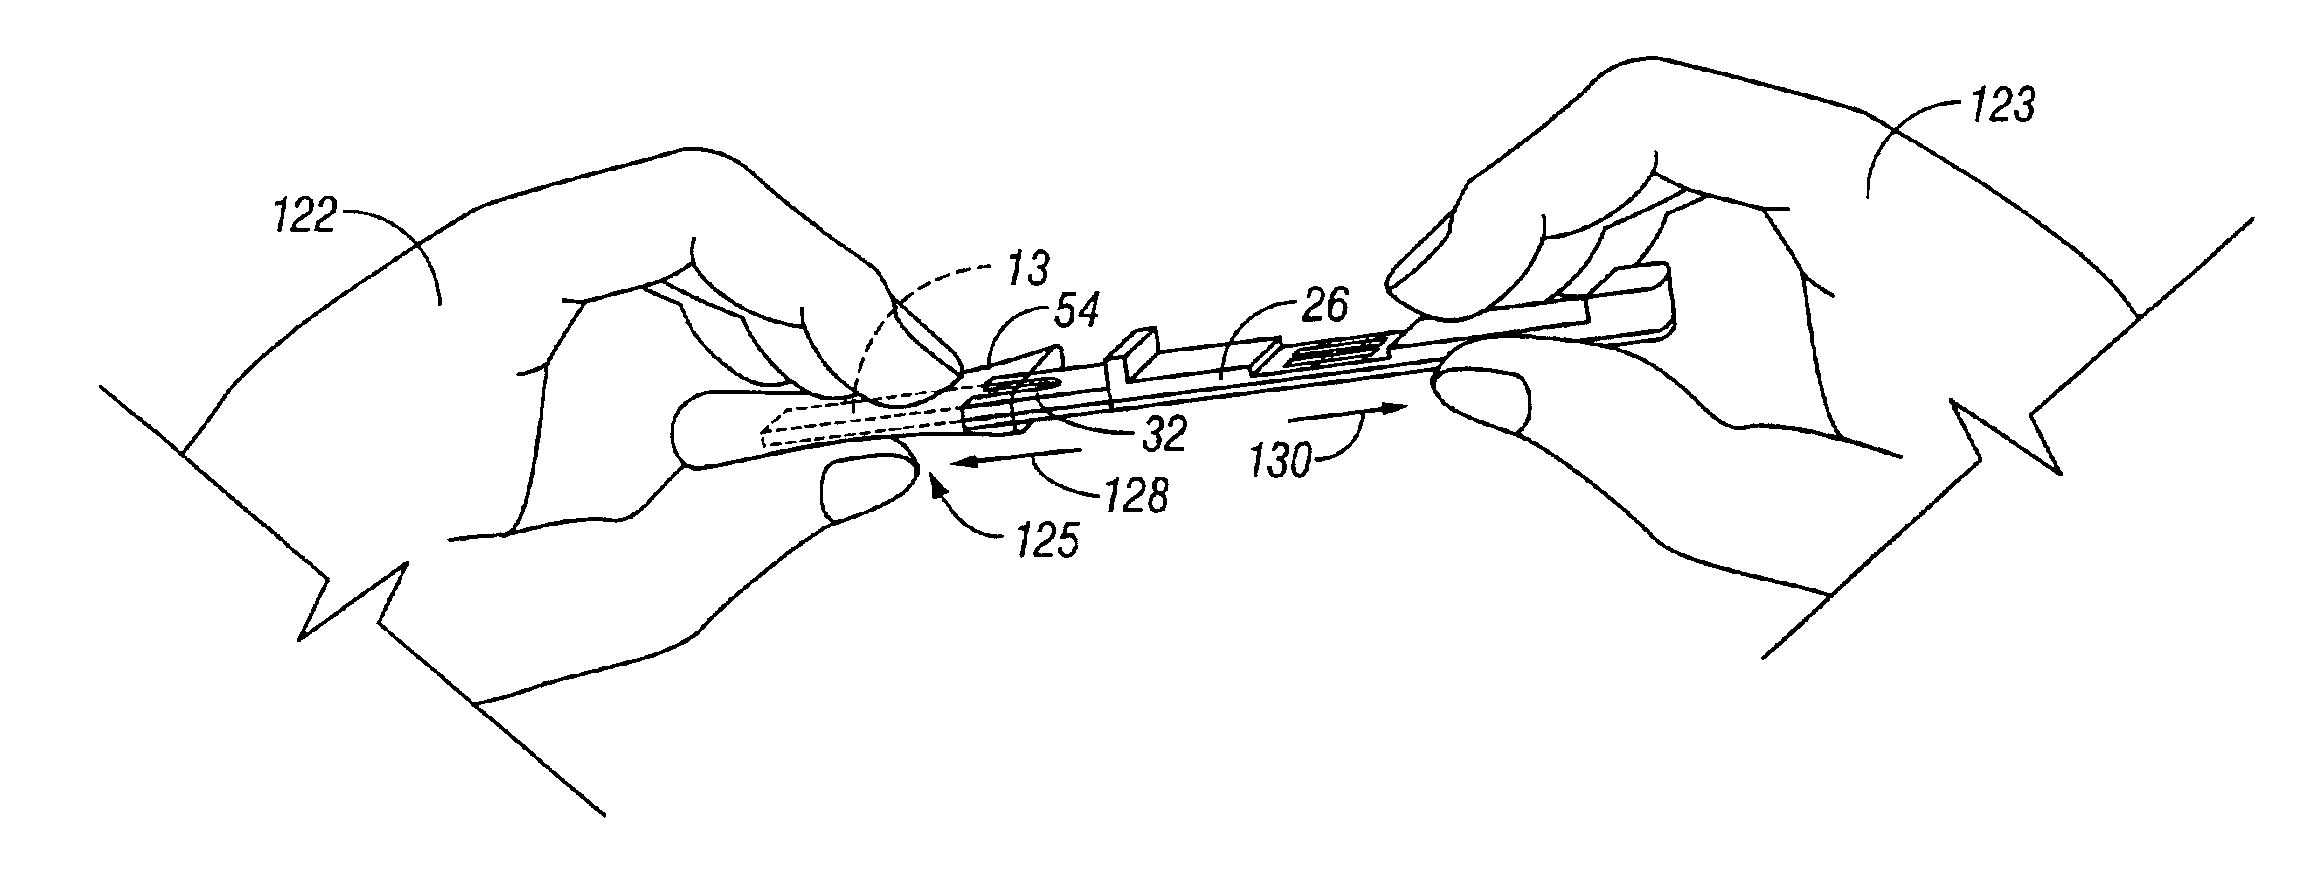 Integrated confirmation sample in a body fluid test device and method of using